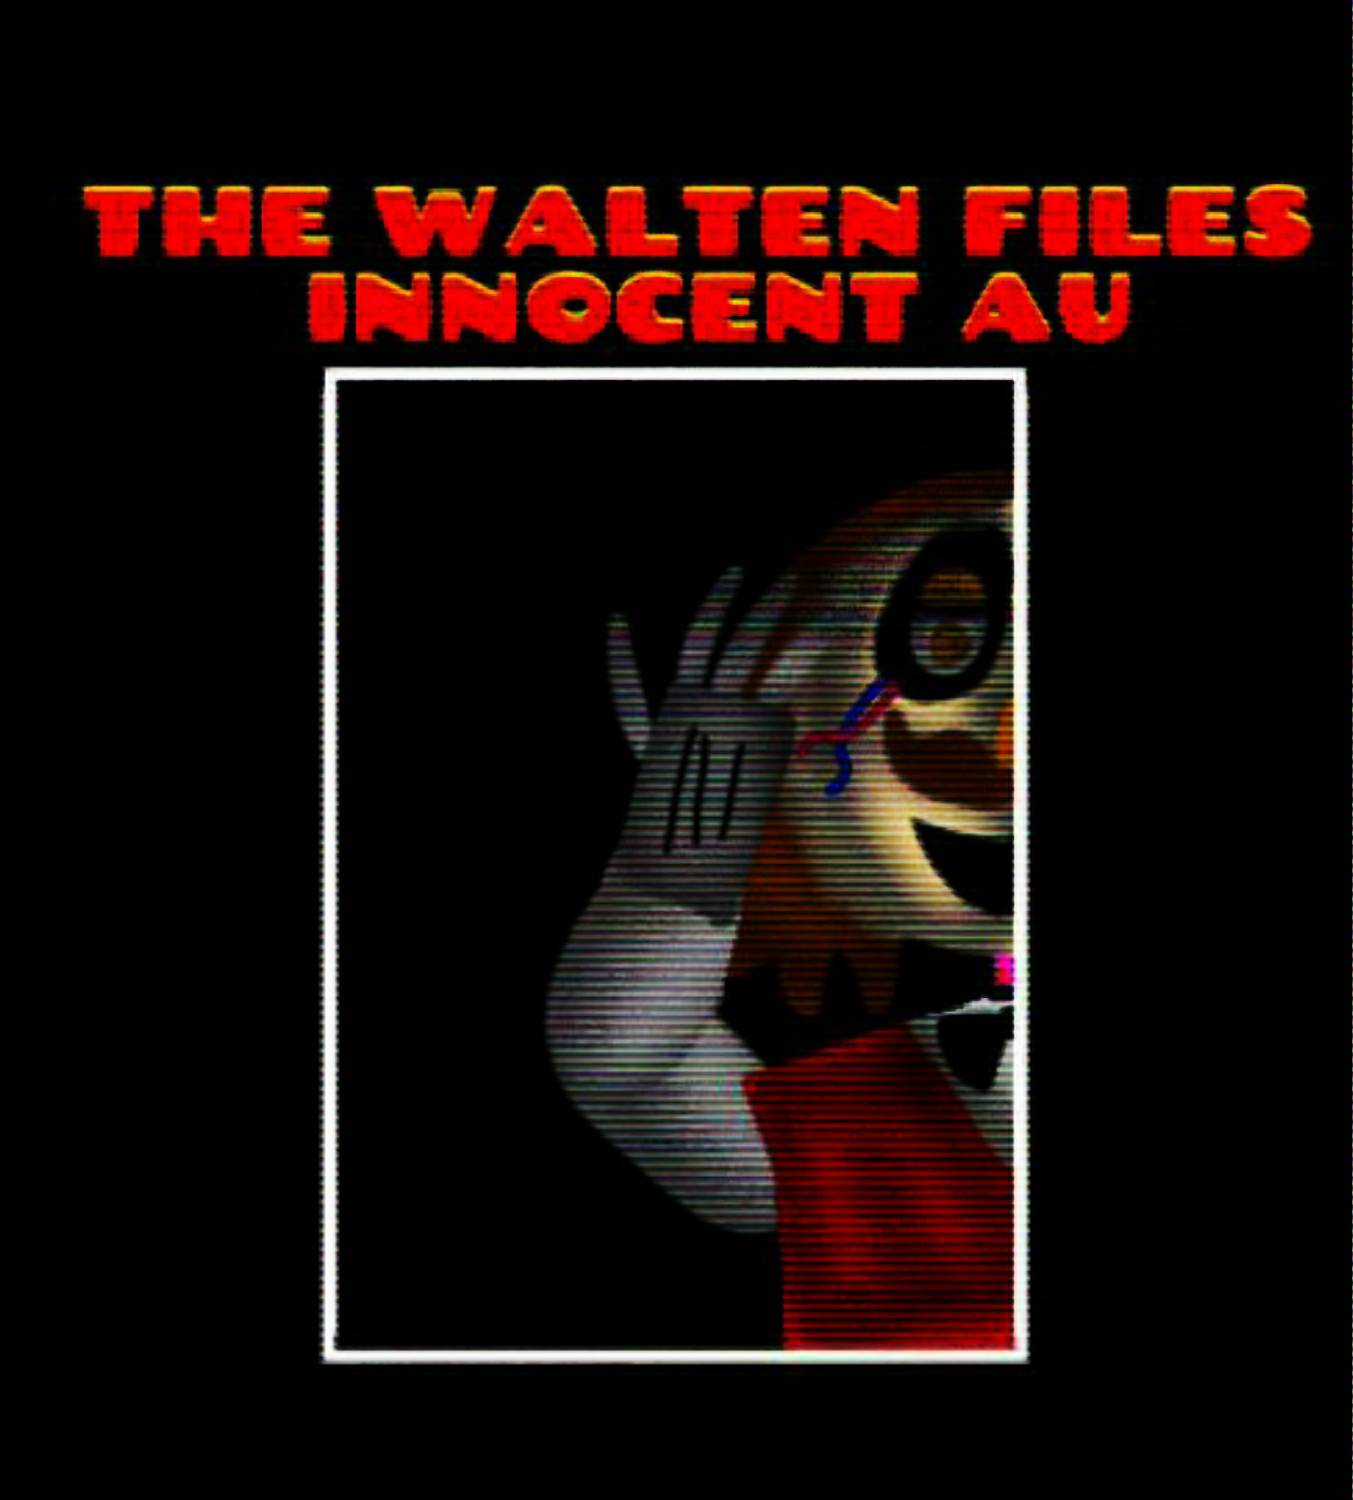 WALTEN FILES 4 COMES OUT JANUARY 7 BABY : r/Thewaltenfiles